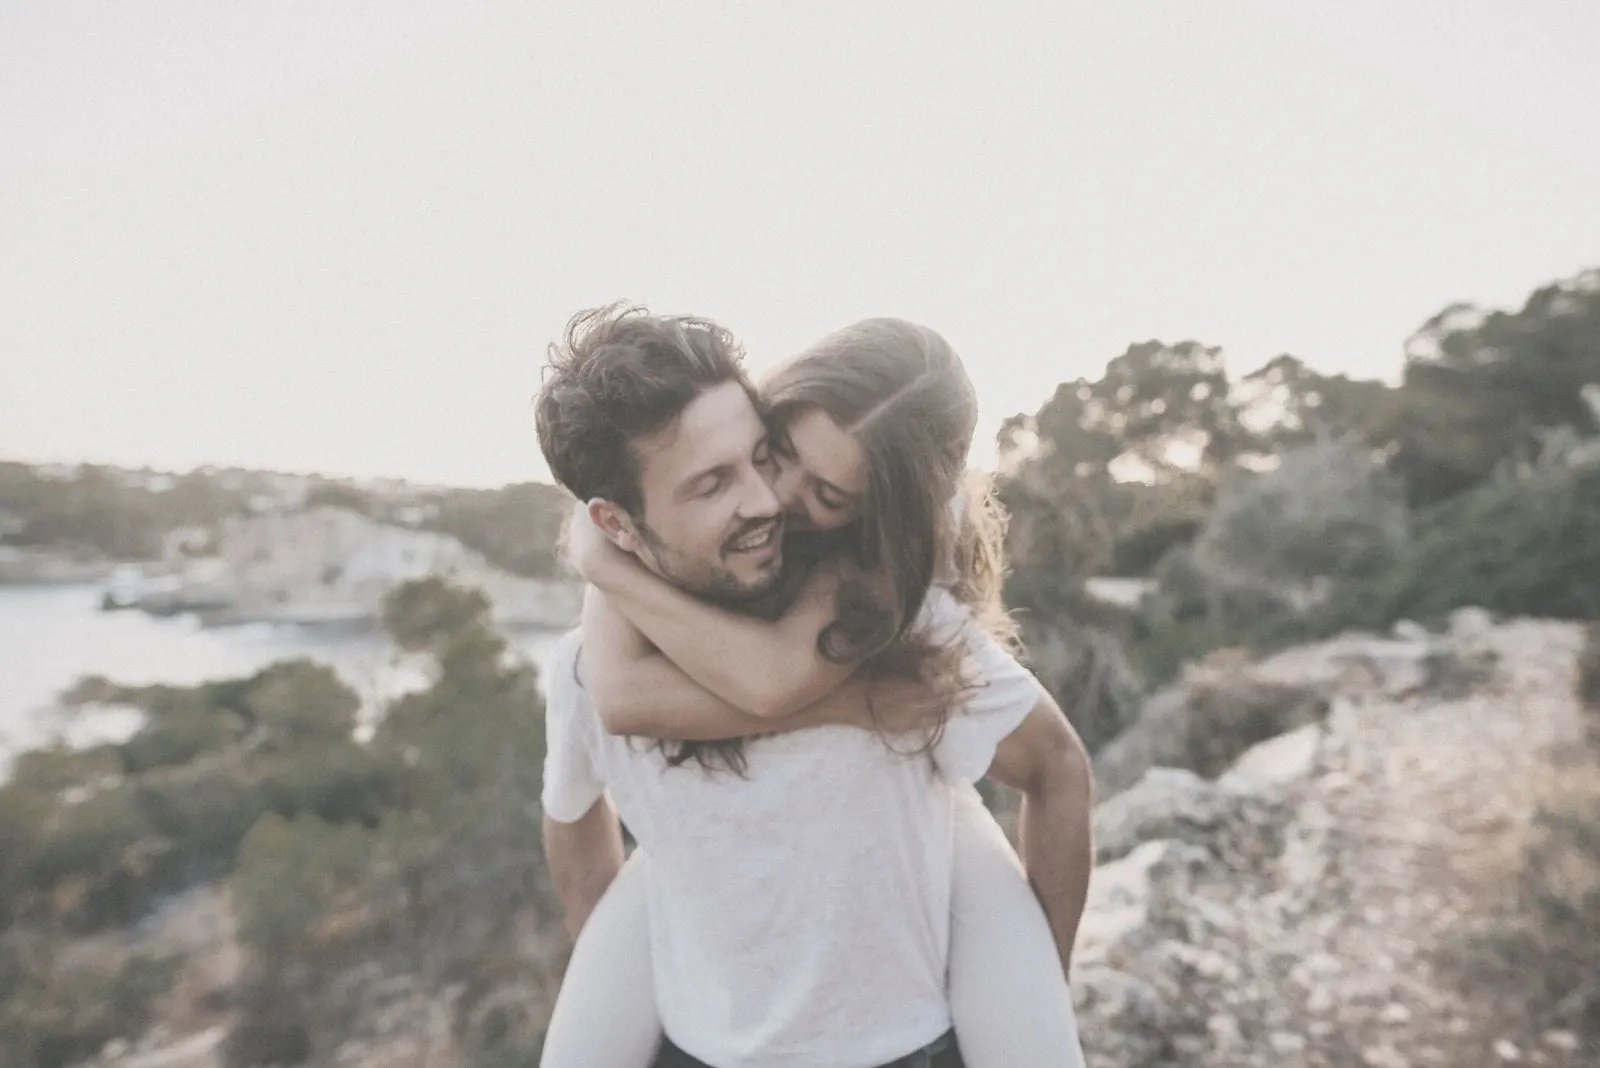 sweet couple piggy back near the body of water cheerfully